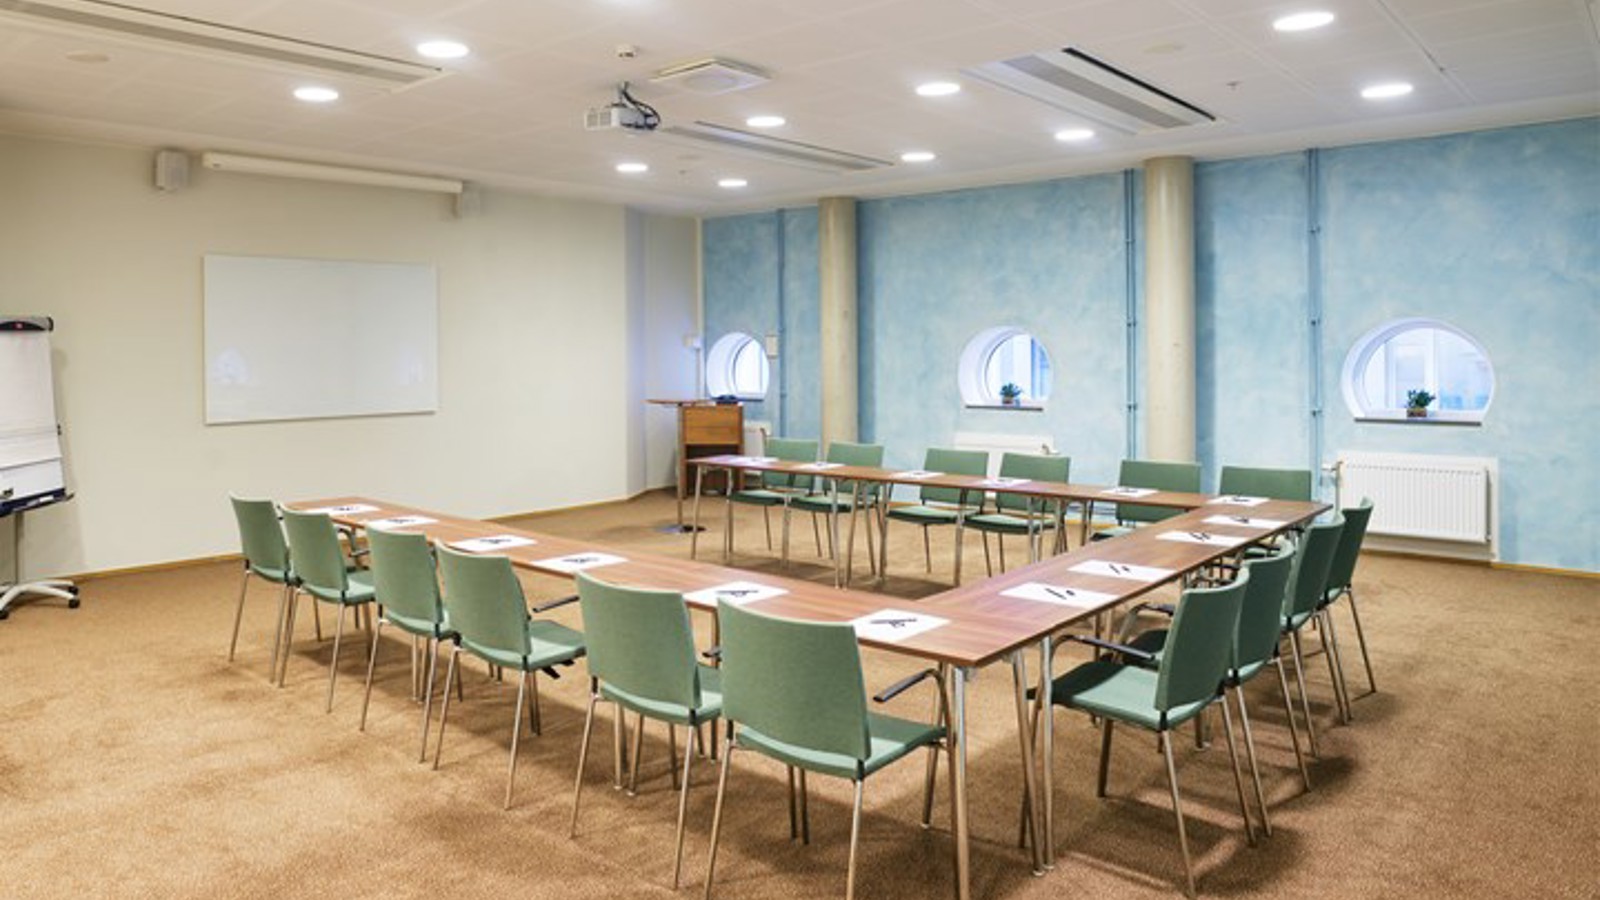 Conference room with U-shaped seating, light blue background wall and round windows